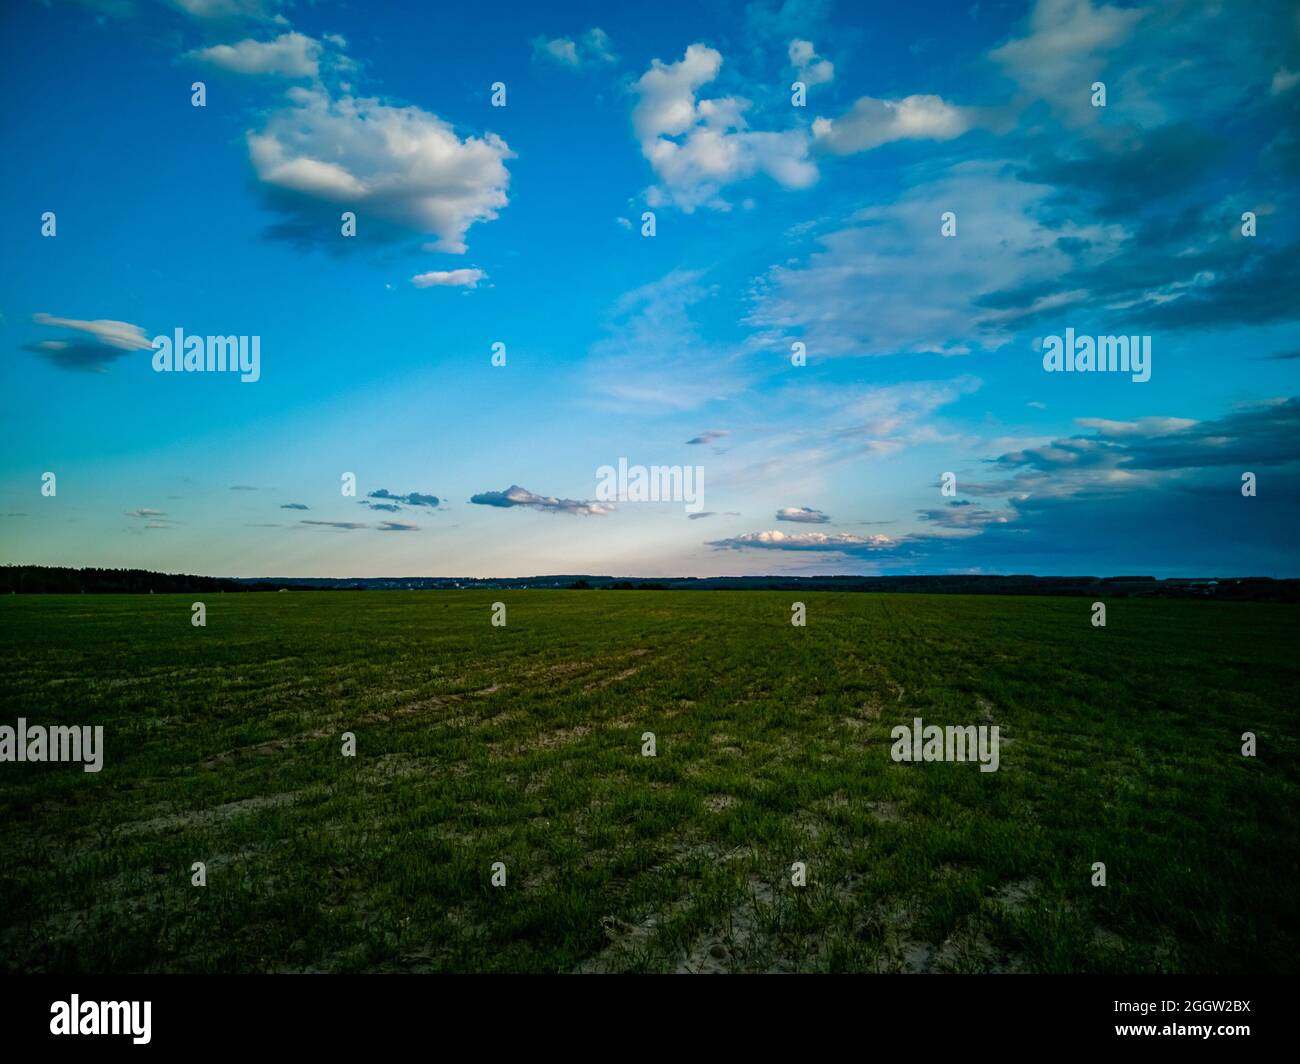 Hill stock image. Image of field, blue, freshness, cloudscape - 13264359